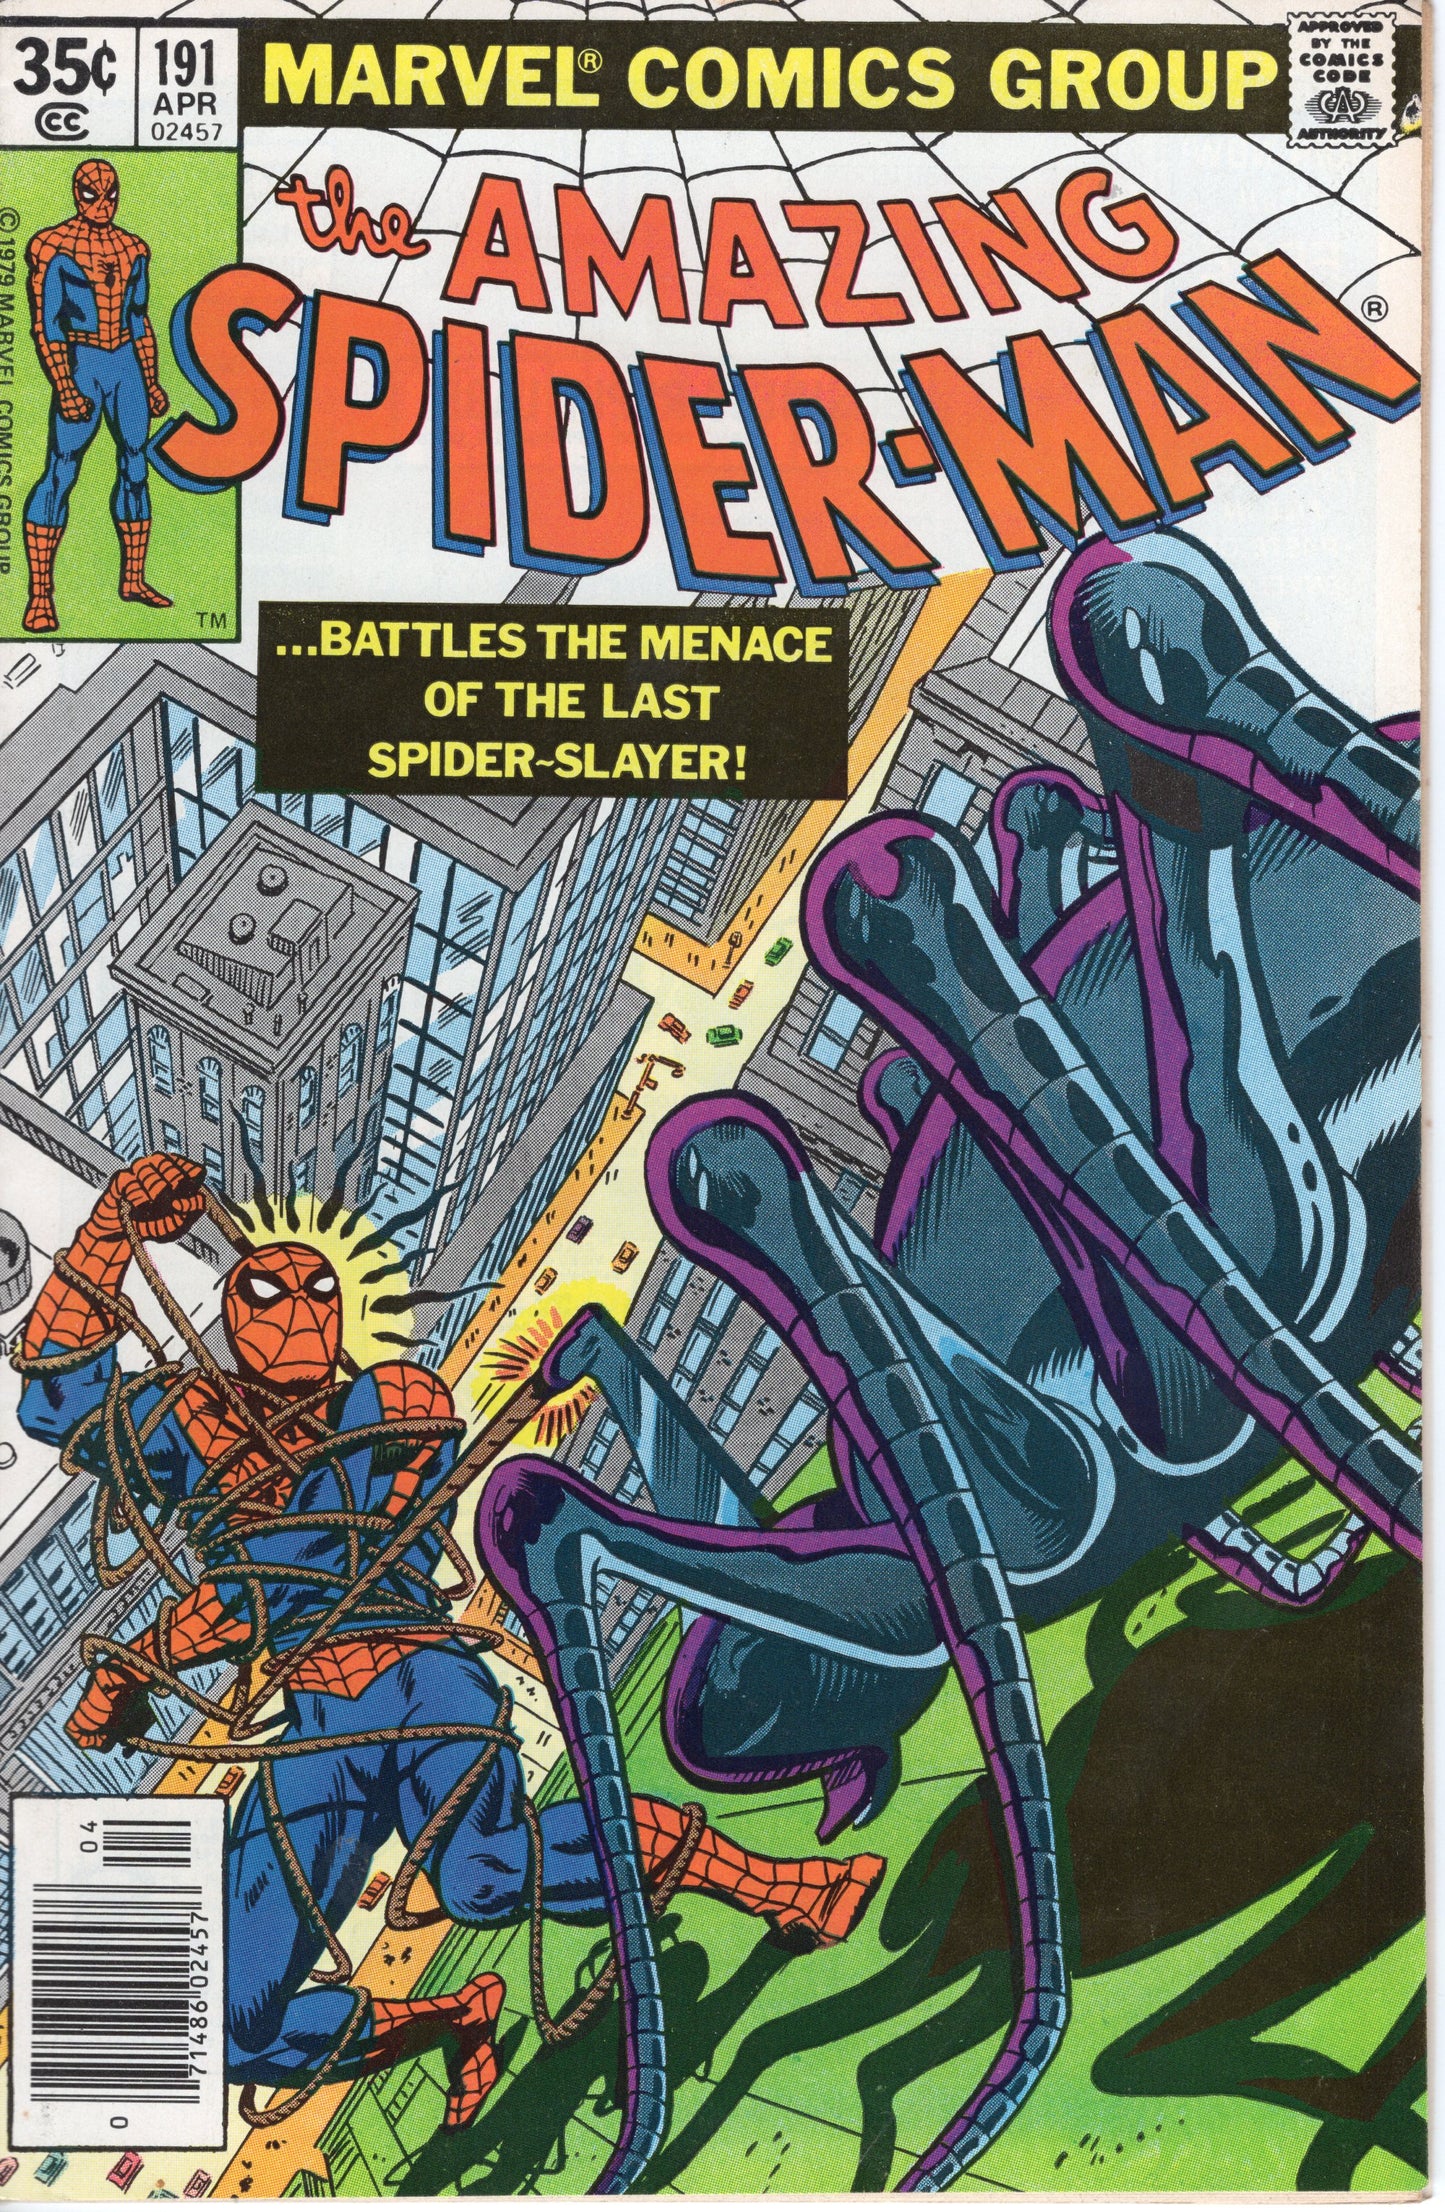 The Amazing Spider-Man - Issue #191 (April, 1979 - Marvel Comics) FN+